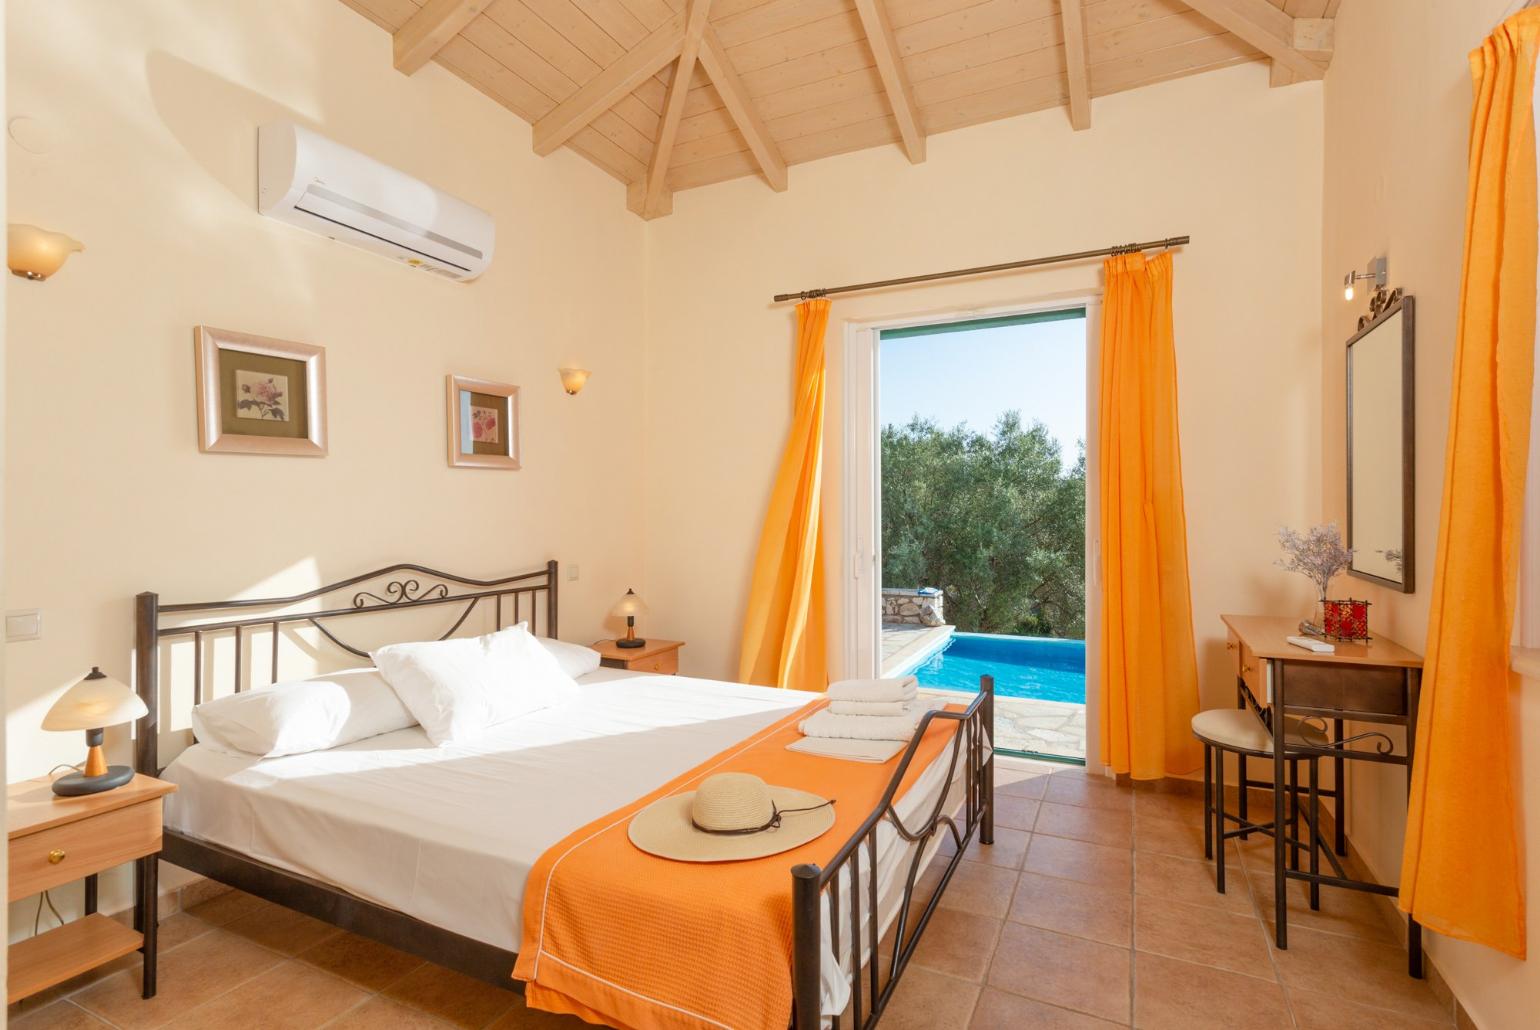 Double bedroom with en suite bathroom, A/C, and pool terrace access